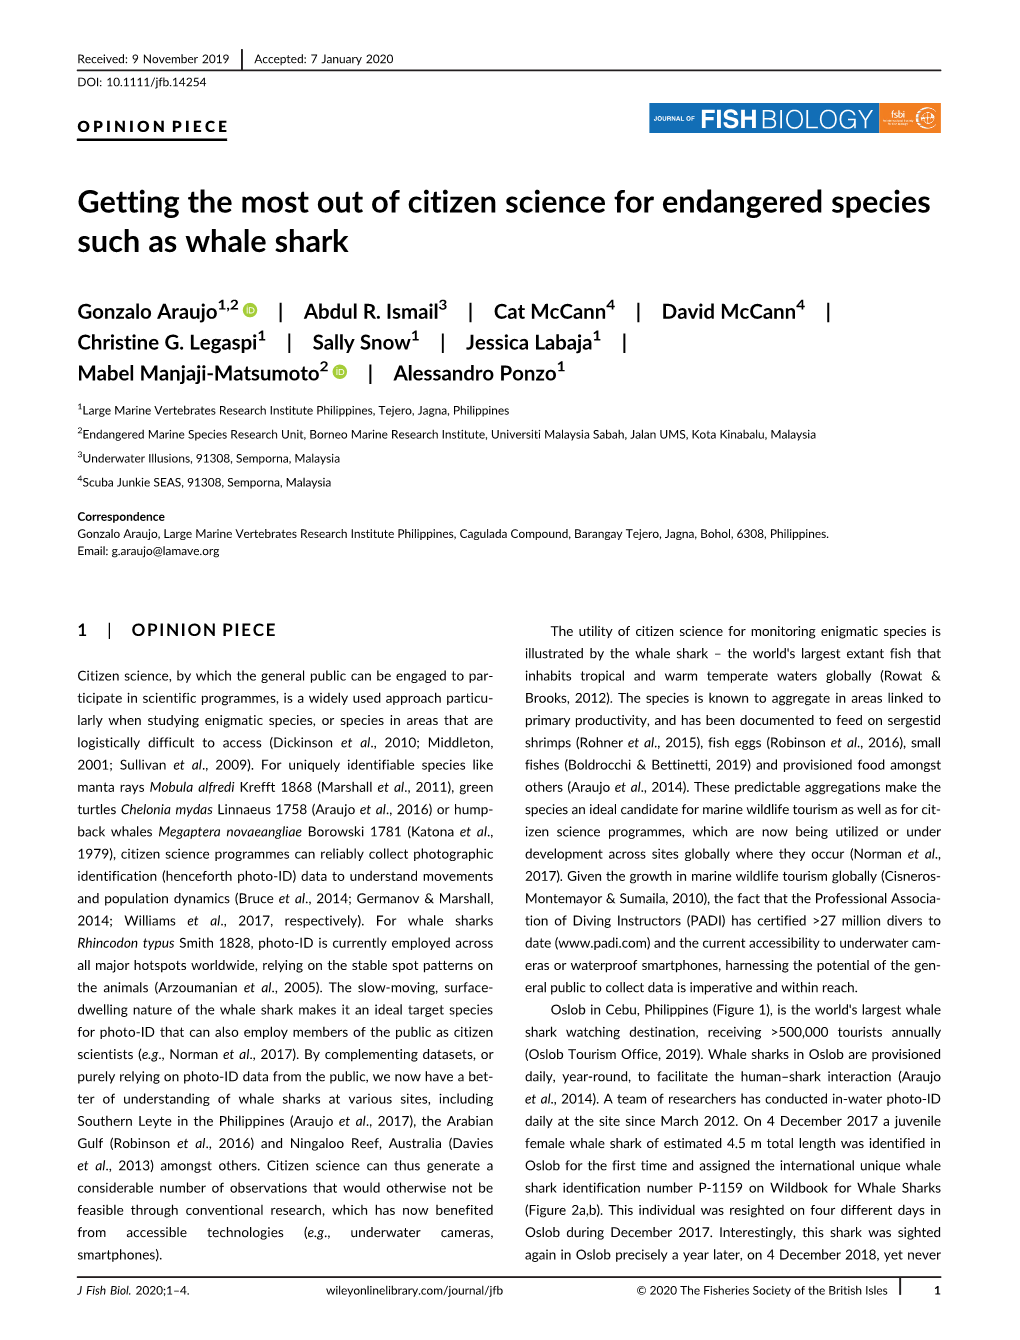 Getting the Most out of Citizen Science for Endangered Species Such As Whale Shark